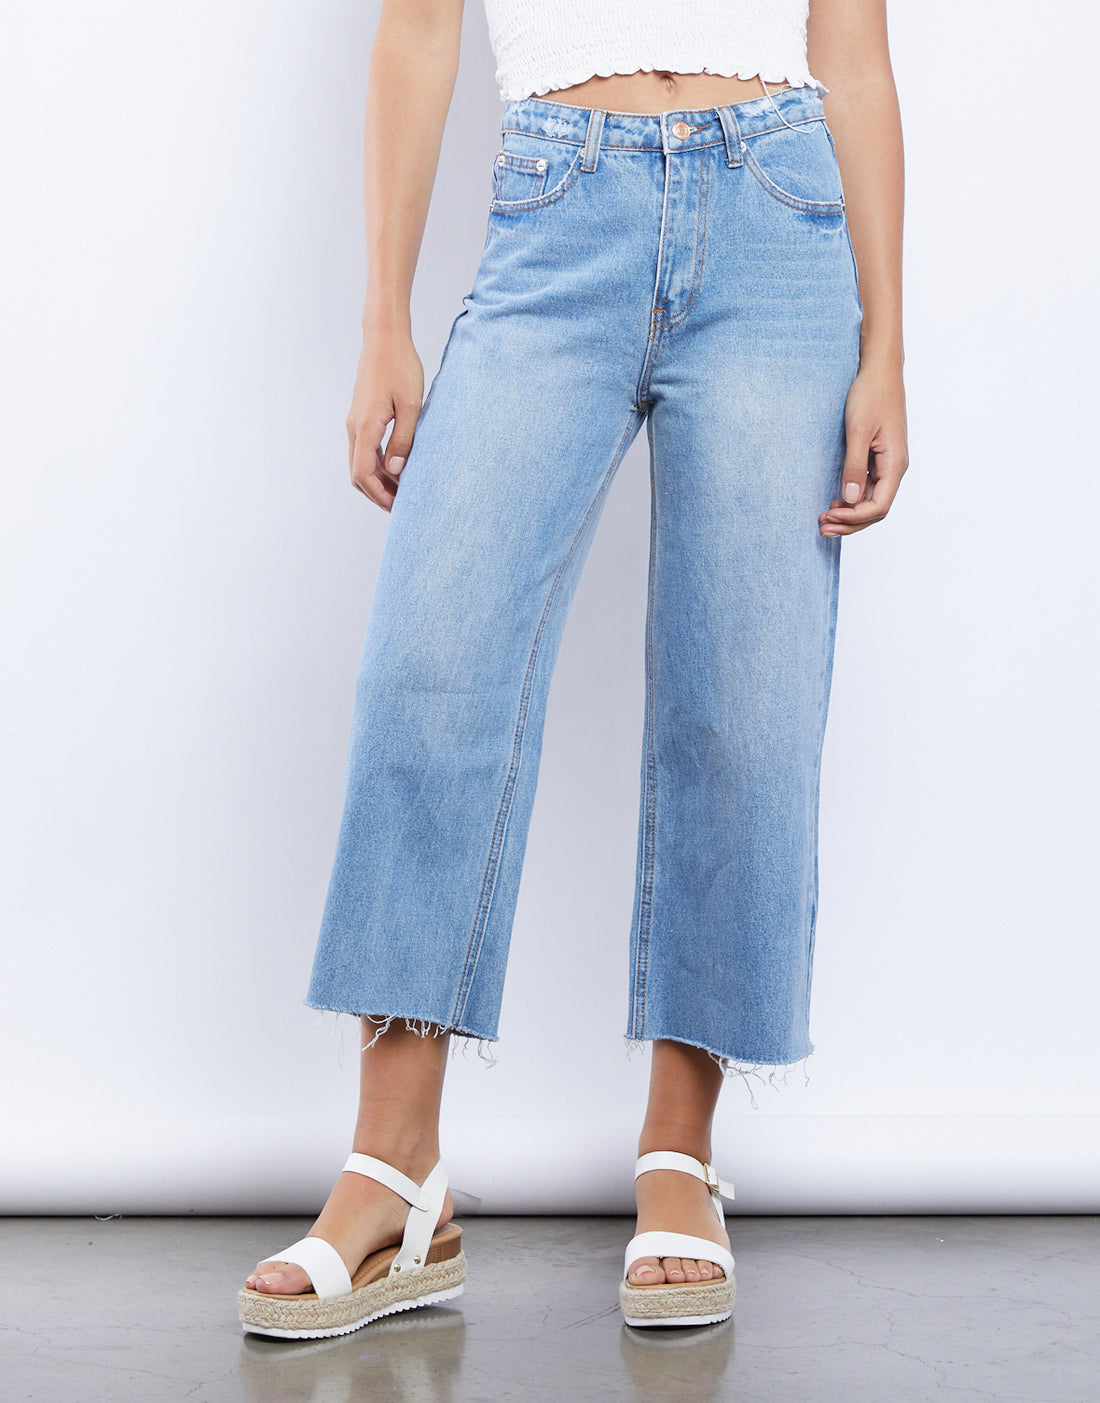 Throwback Wide Leg Jeans - Wide Leg Jeans Cropped - Flare Leg Jeans ...